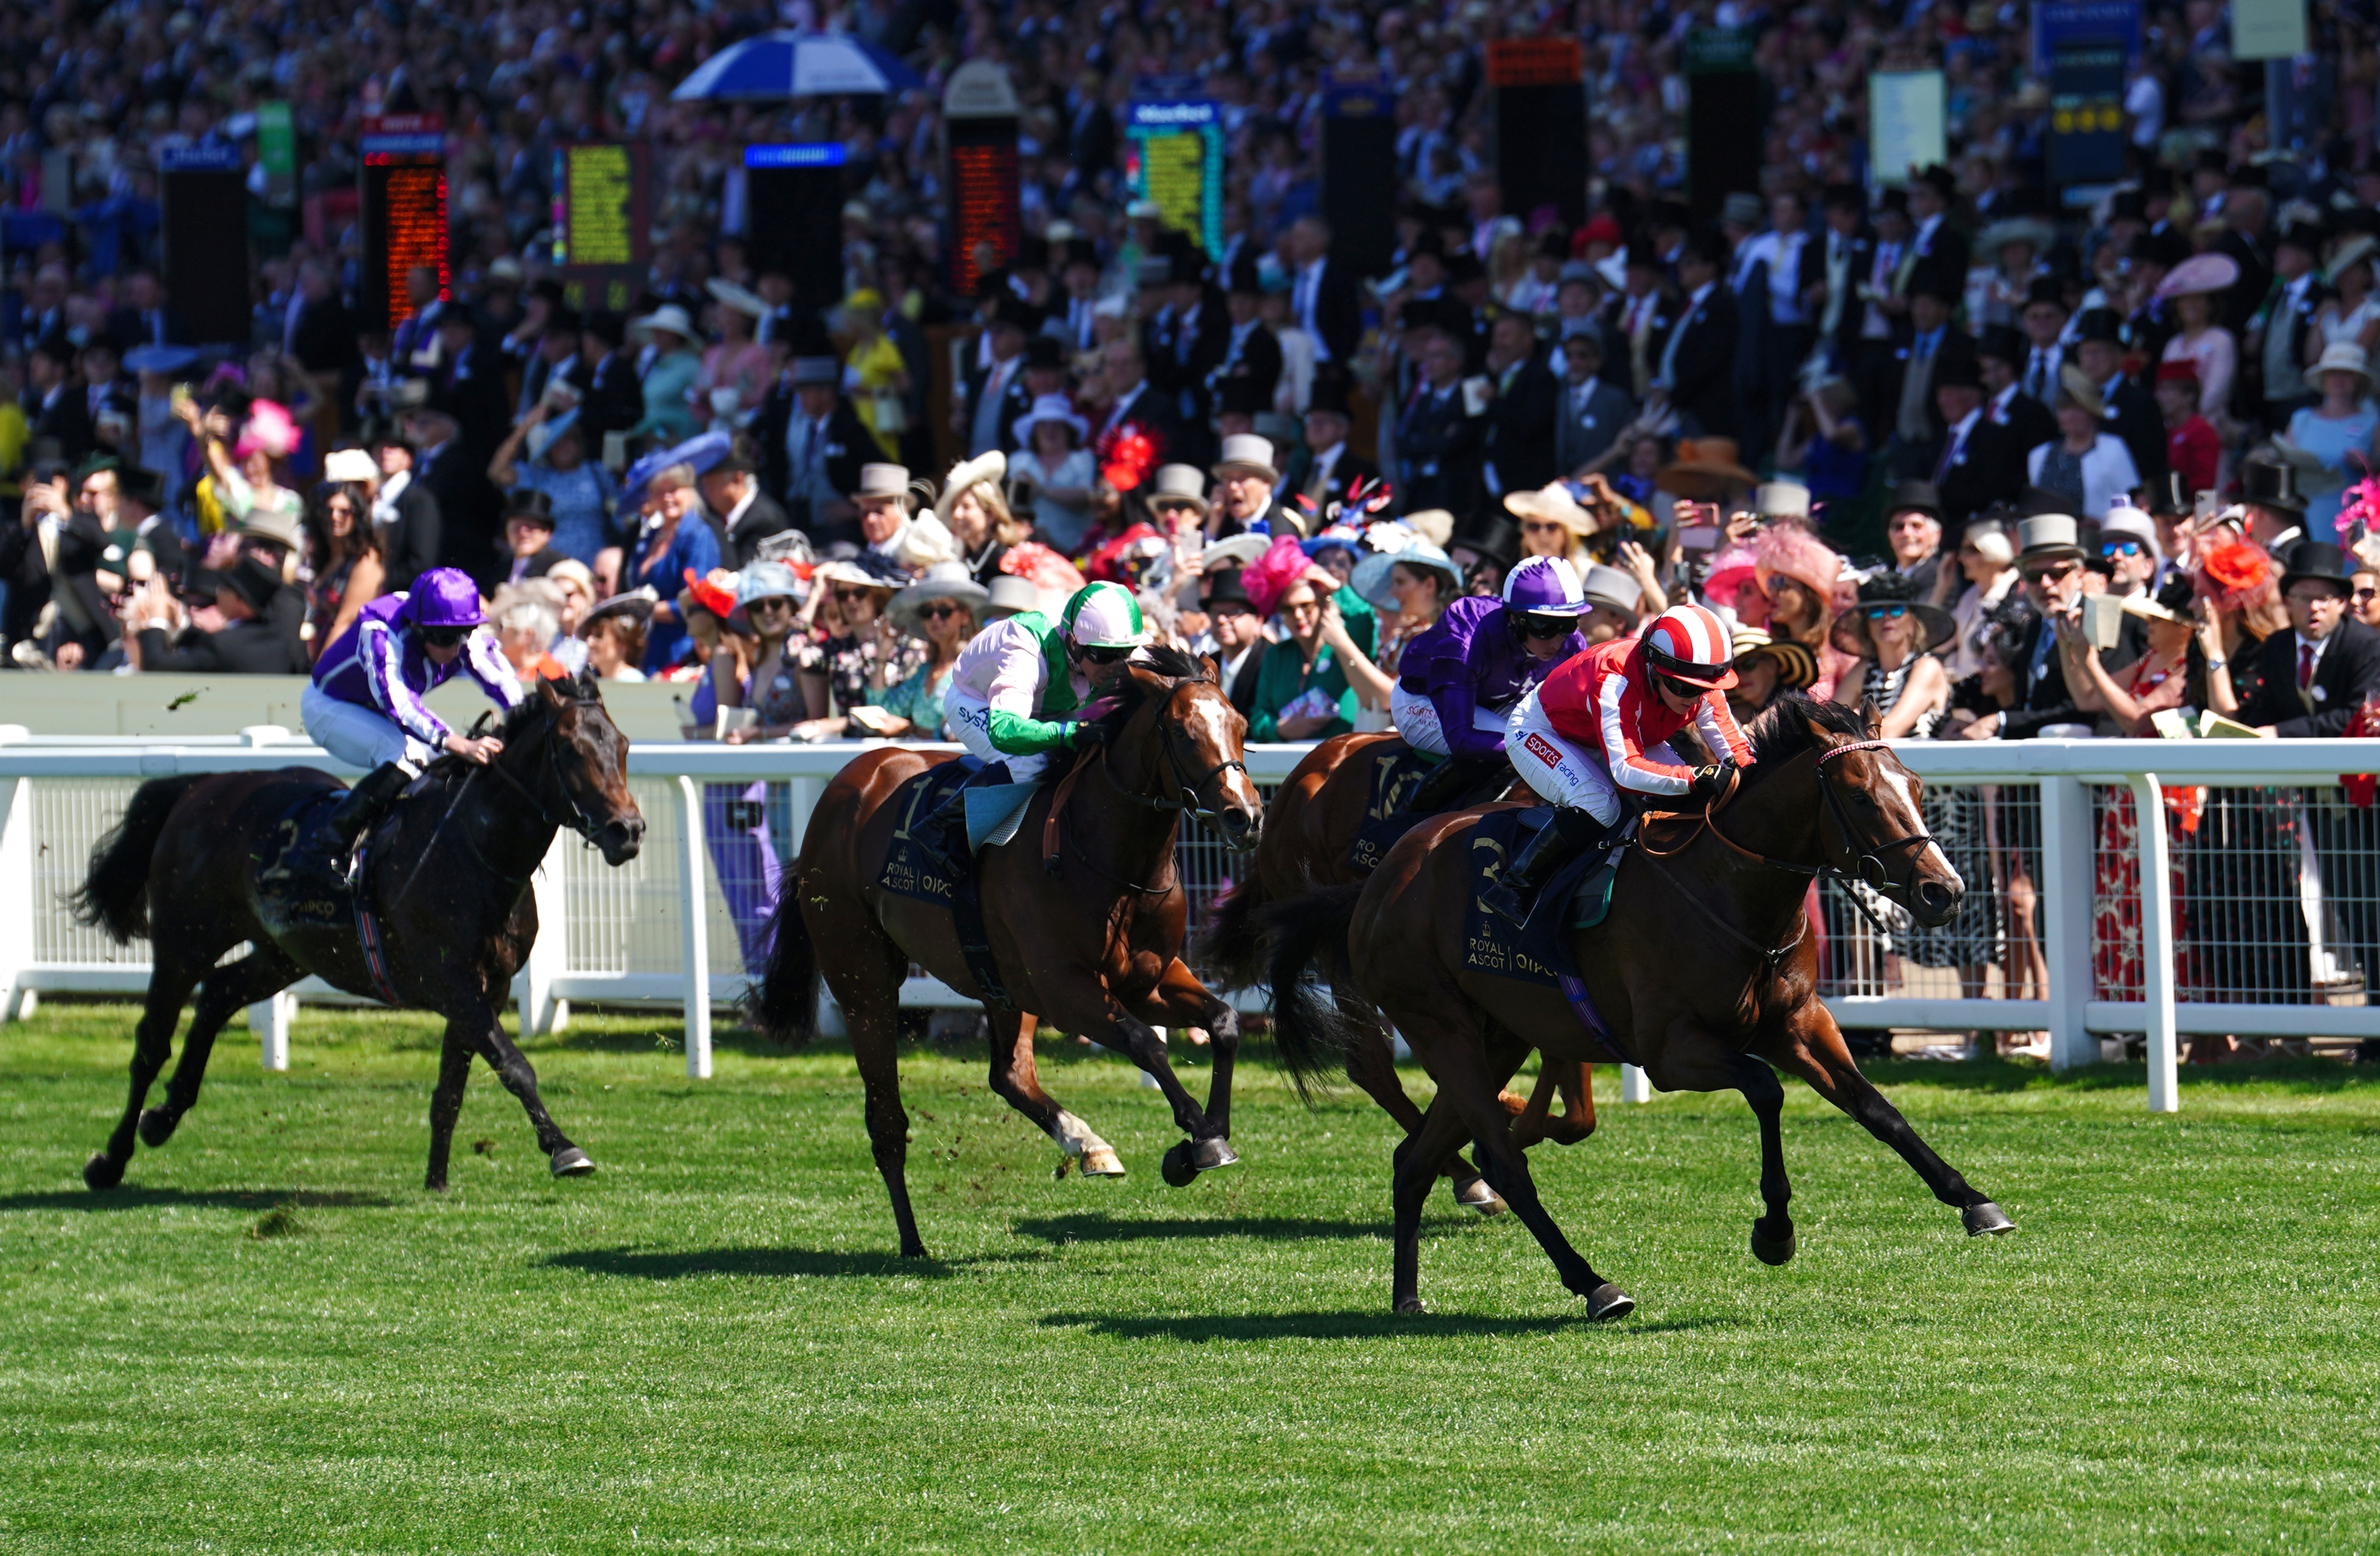 Bradsell and Hollie Doyle (right) winning the Coventry Stakes at Royal Ascot